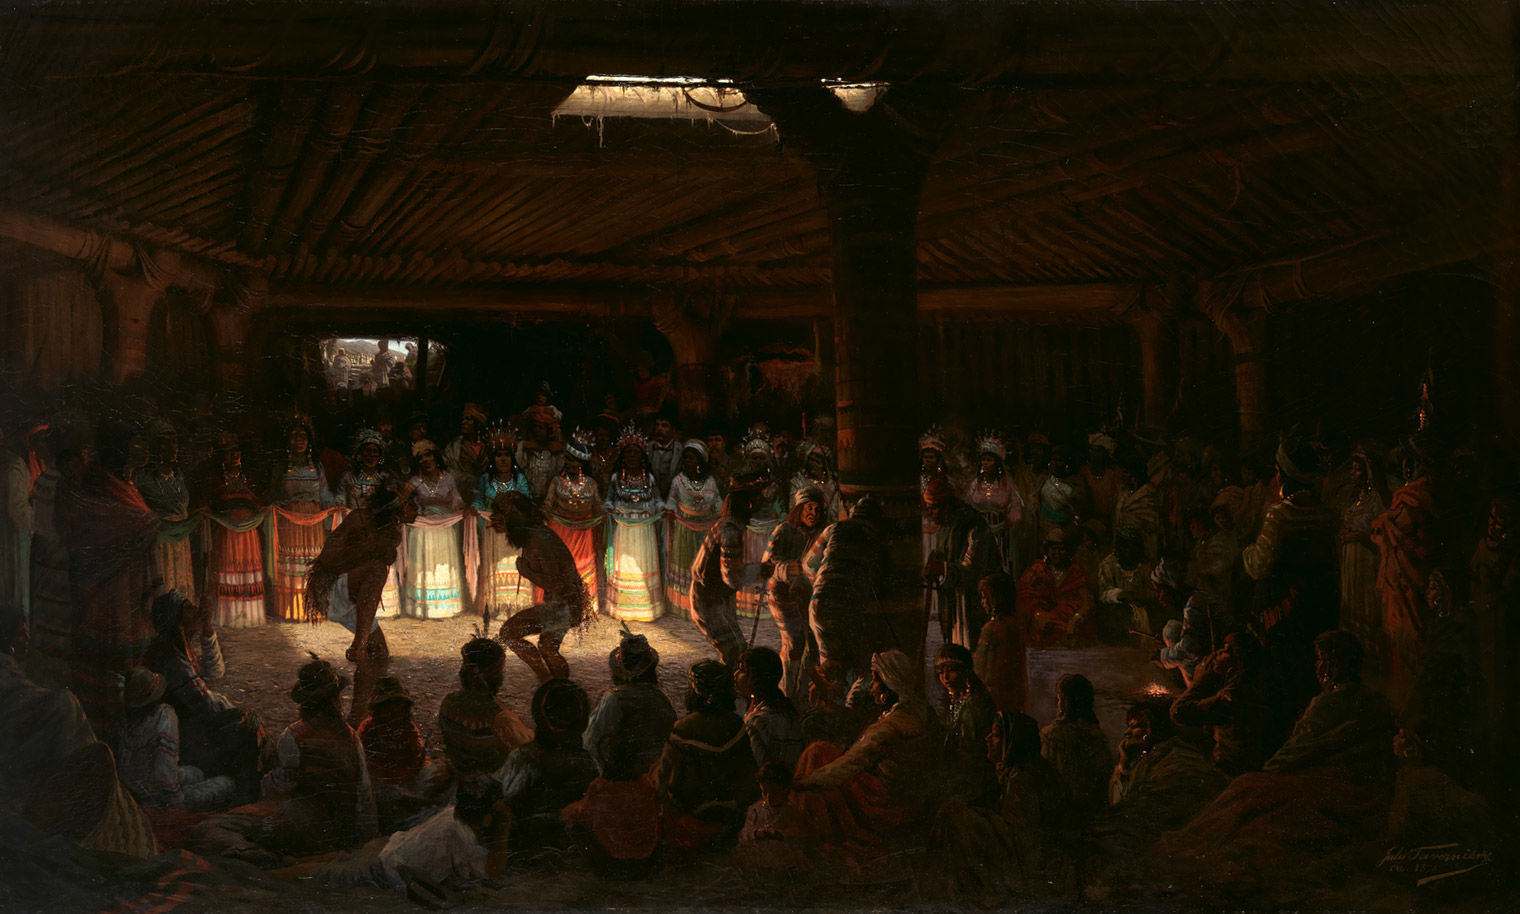 A painting of a dark room lit by a fire, with dancers